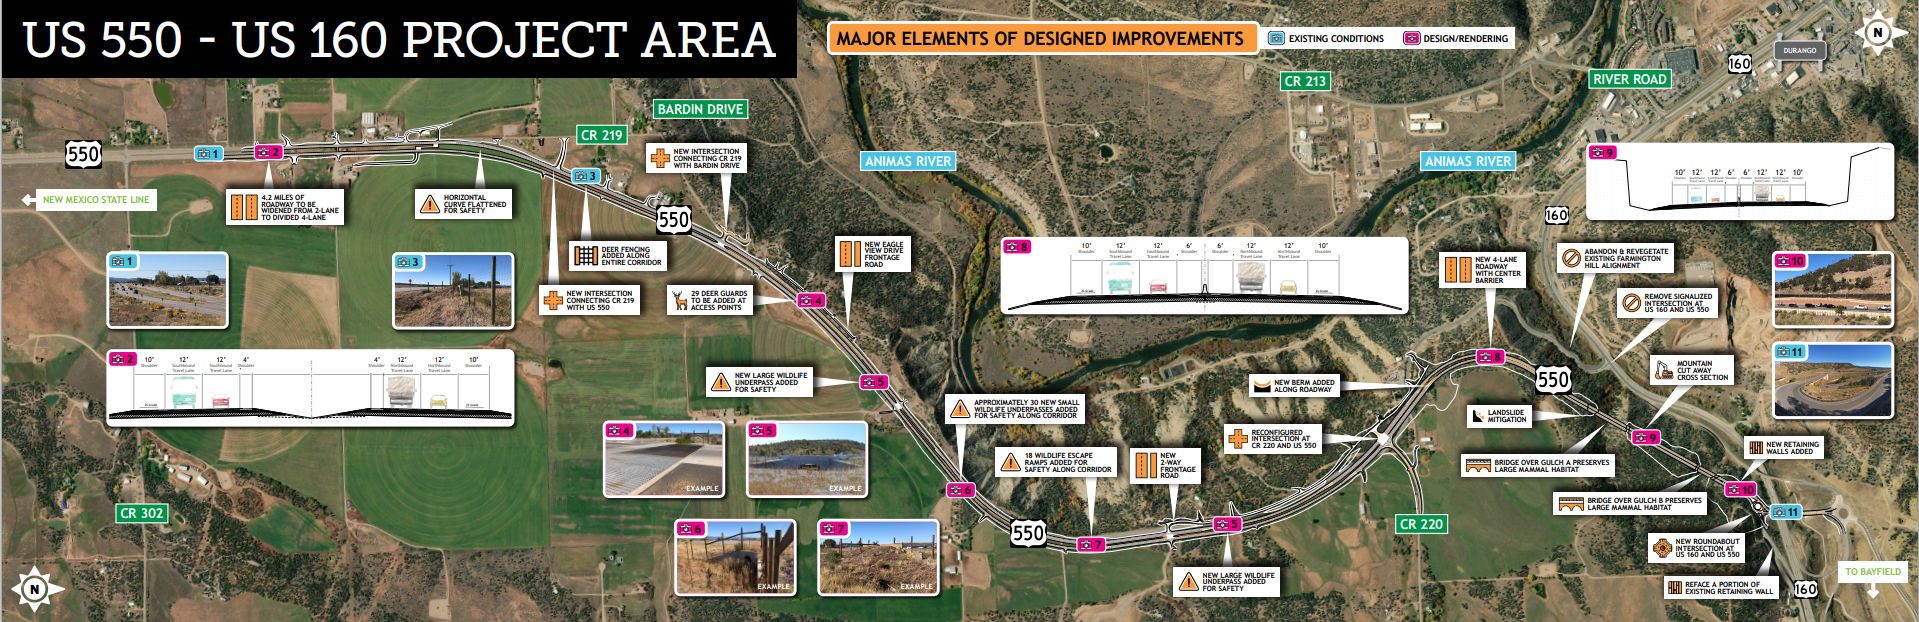 US 550 to US 160 project area major elements of designed improvements detail image